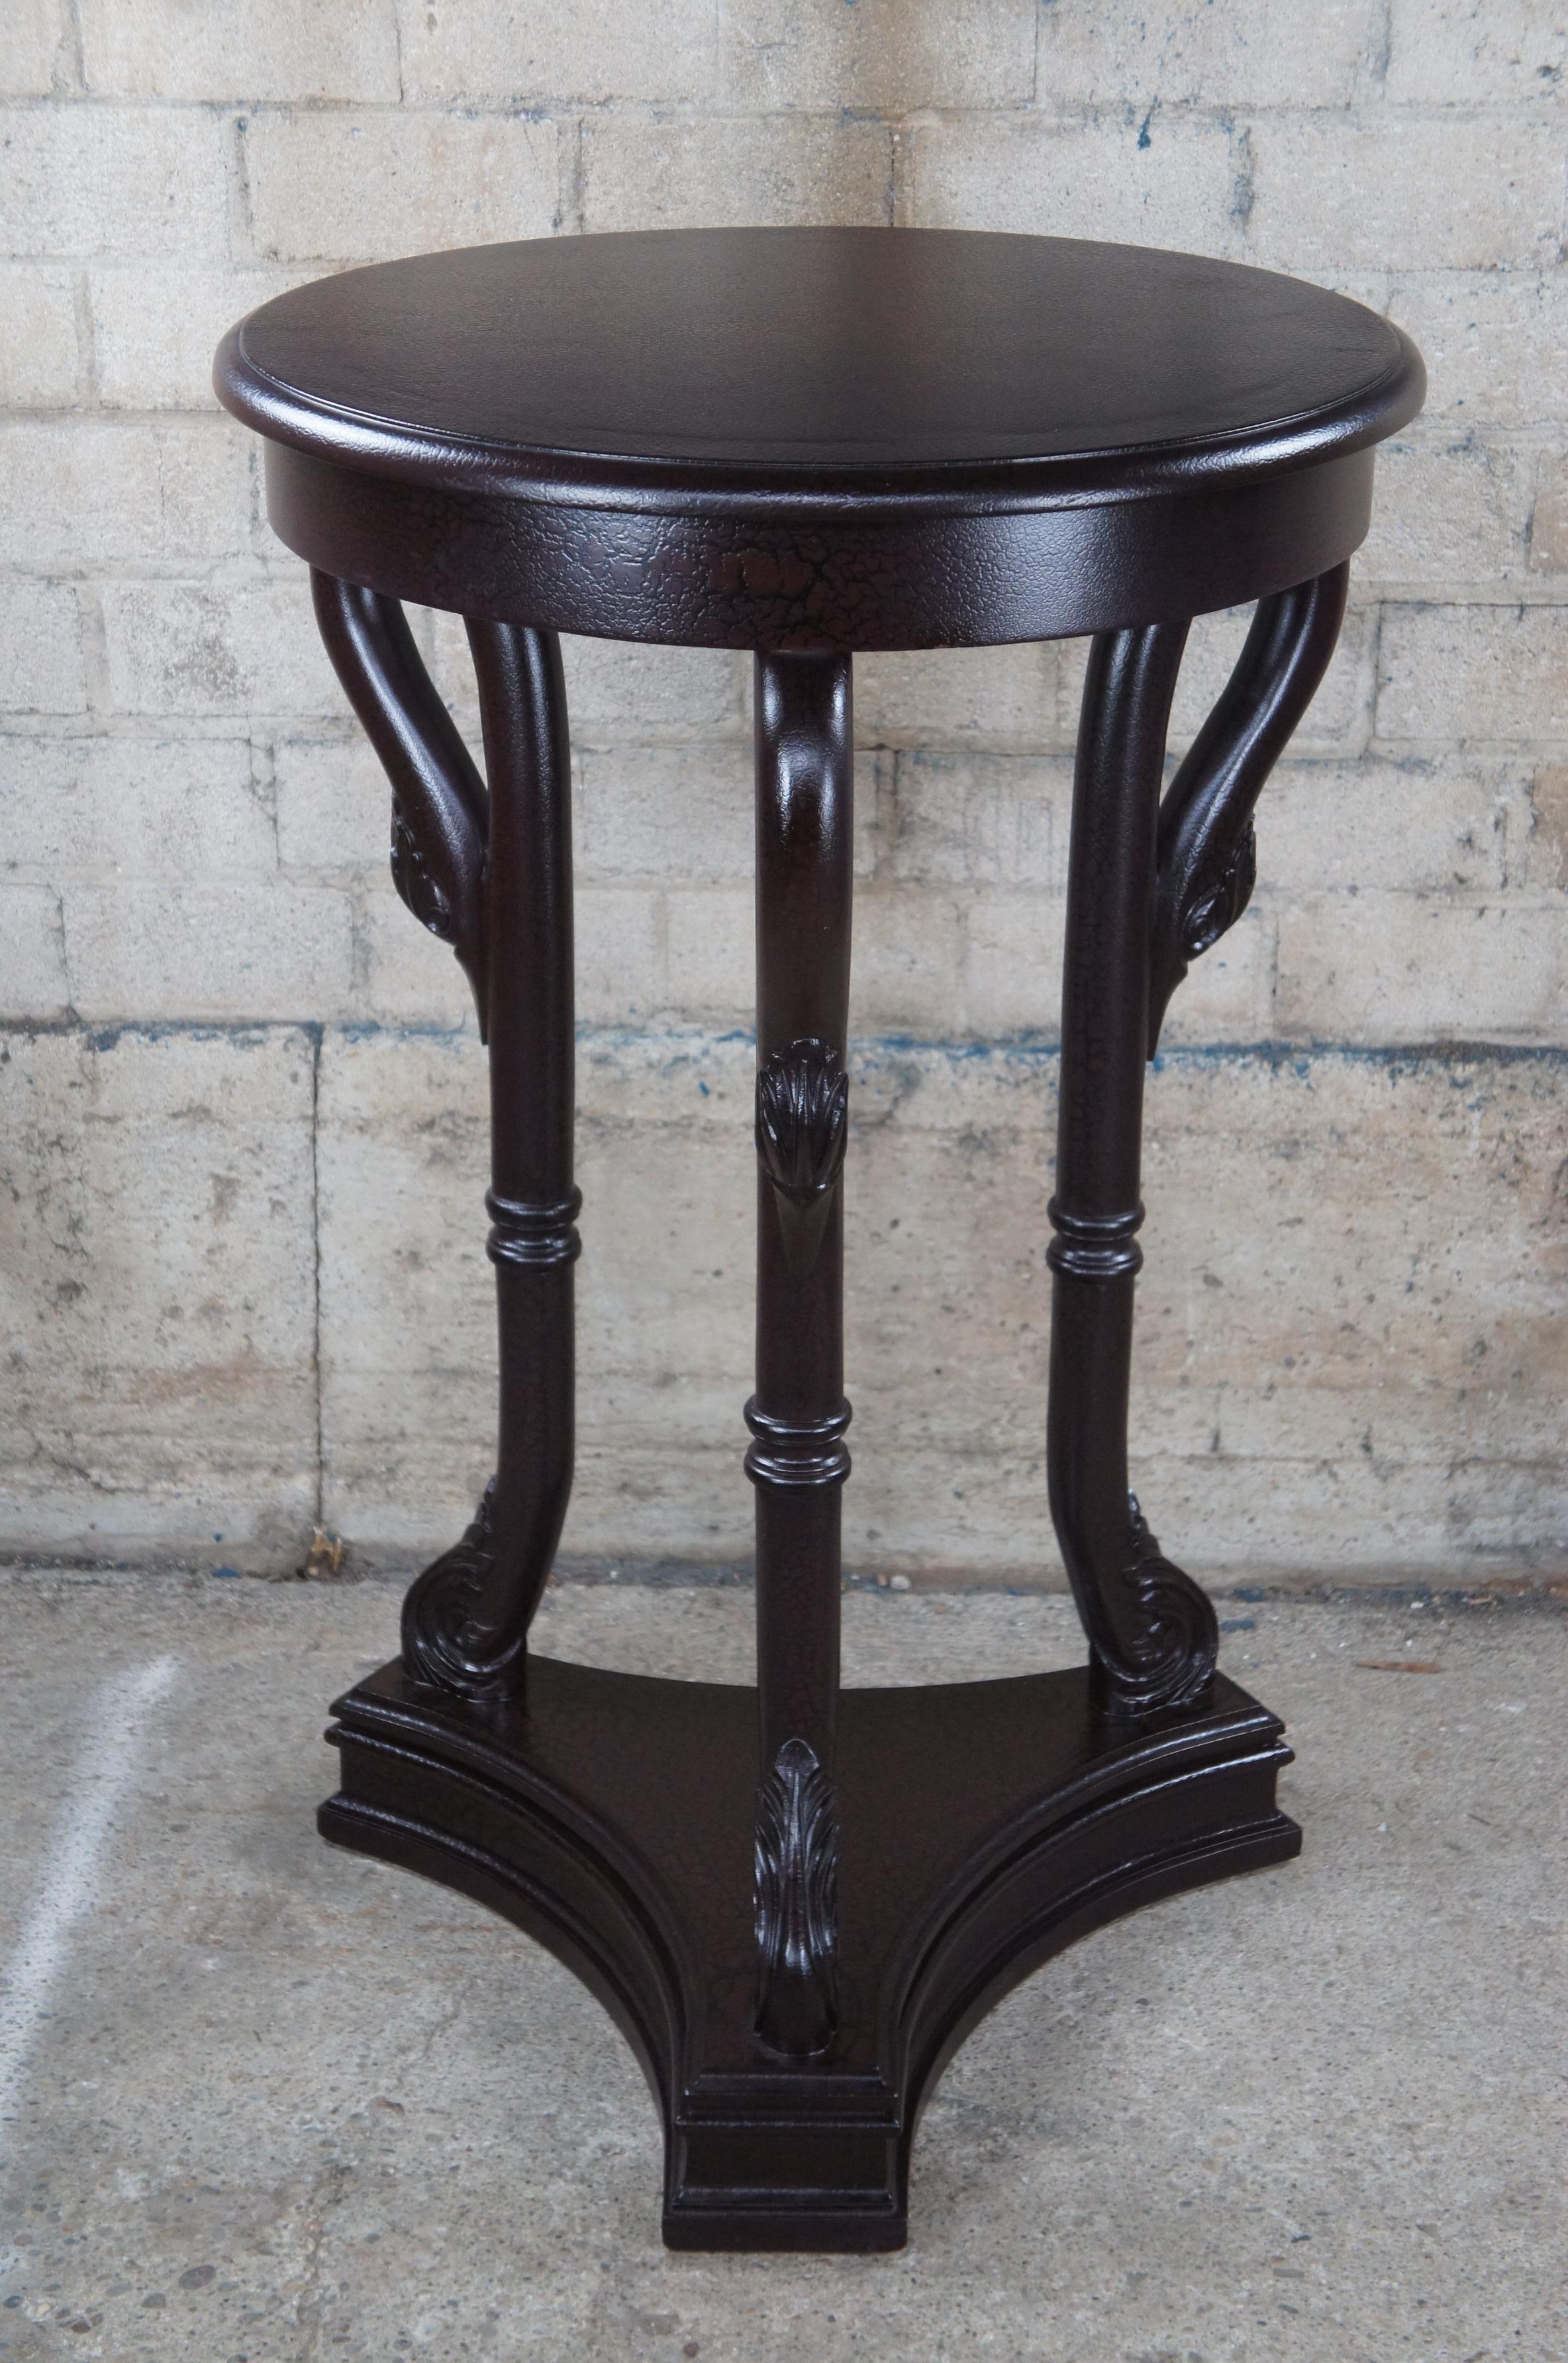 20th Century French Directoire Crackle Lacquer Gueridon Swan Pedestal Table Sculpture Stand For Sale